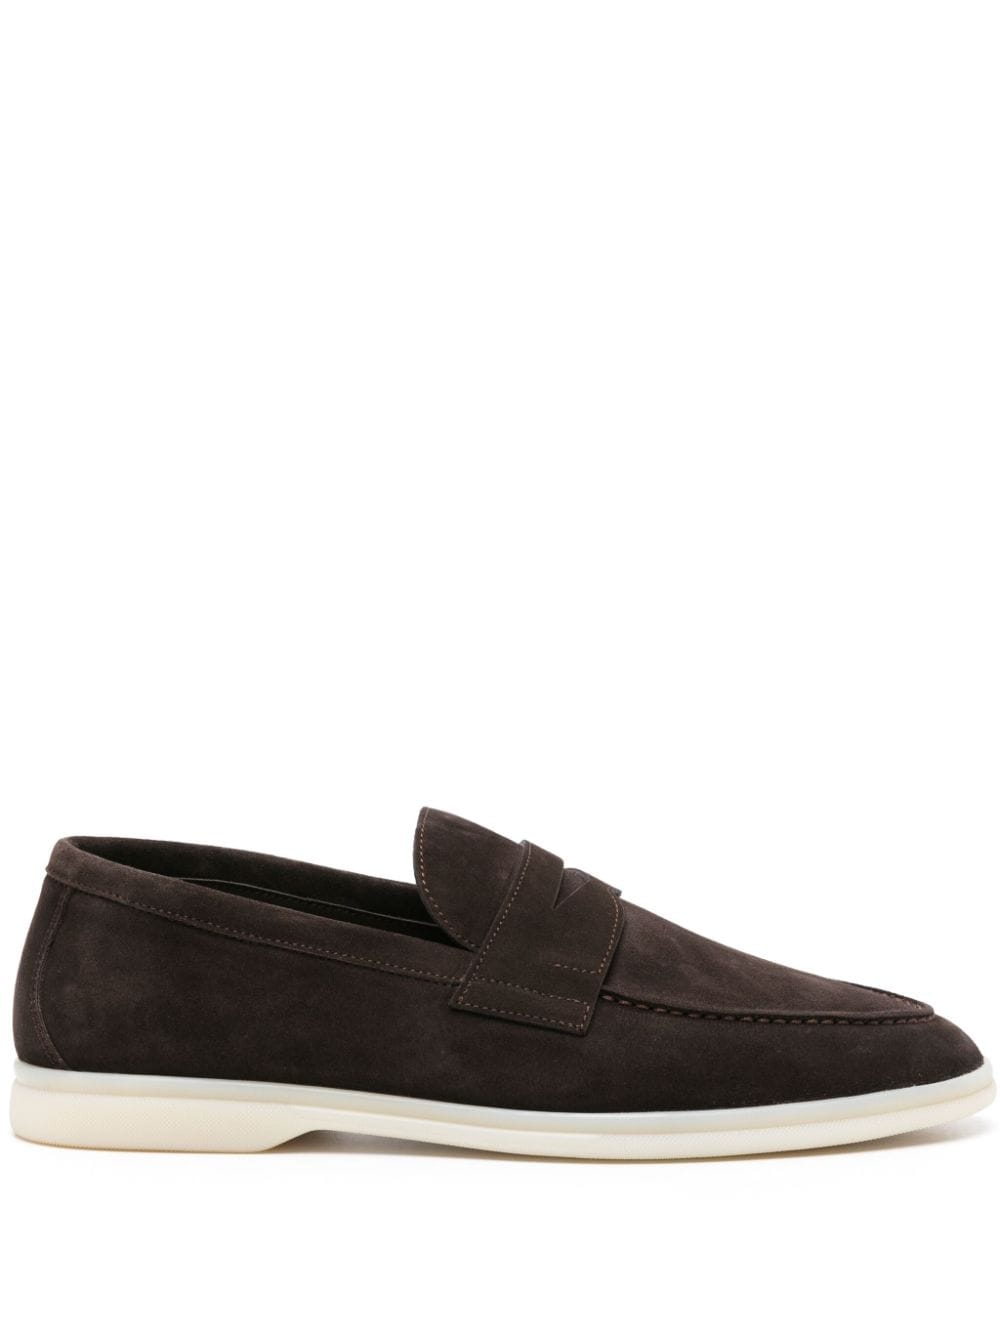 Scarosso Luciano suede loafers - Marrone